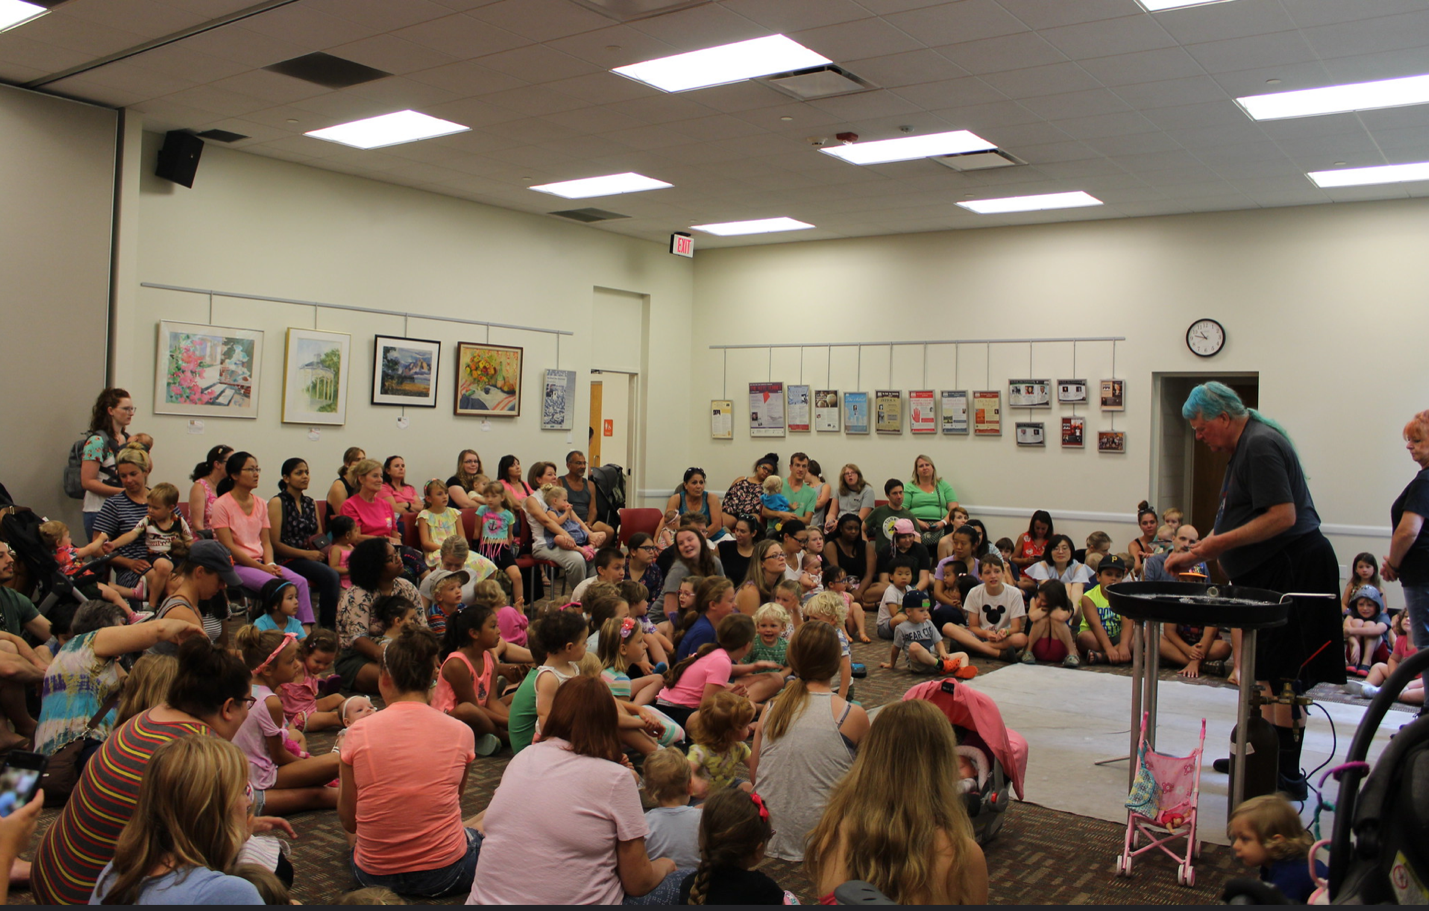 East Lansing Public Library – “Bubble Boy” family program. These programs happen 4-5 times a week in the community room, all year long. 